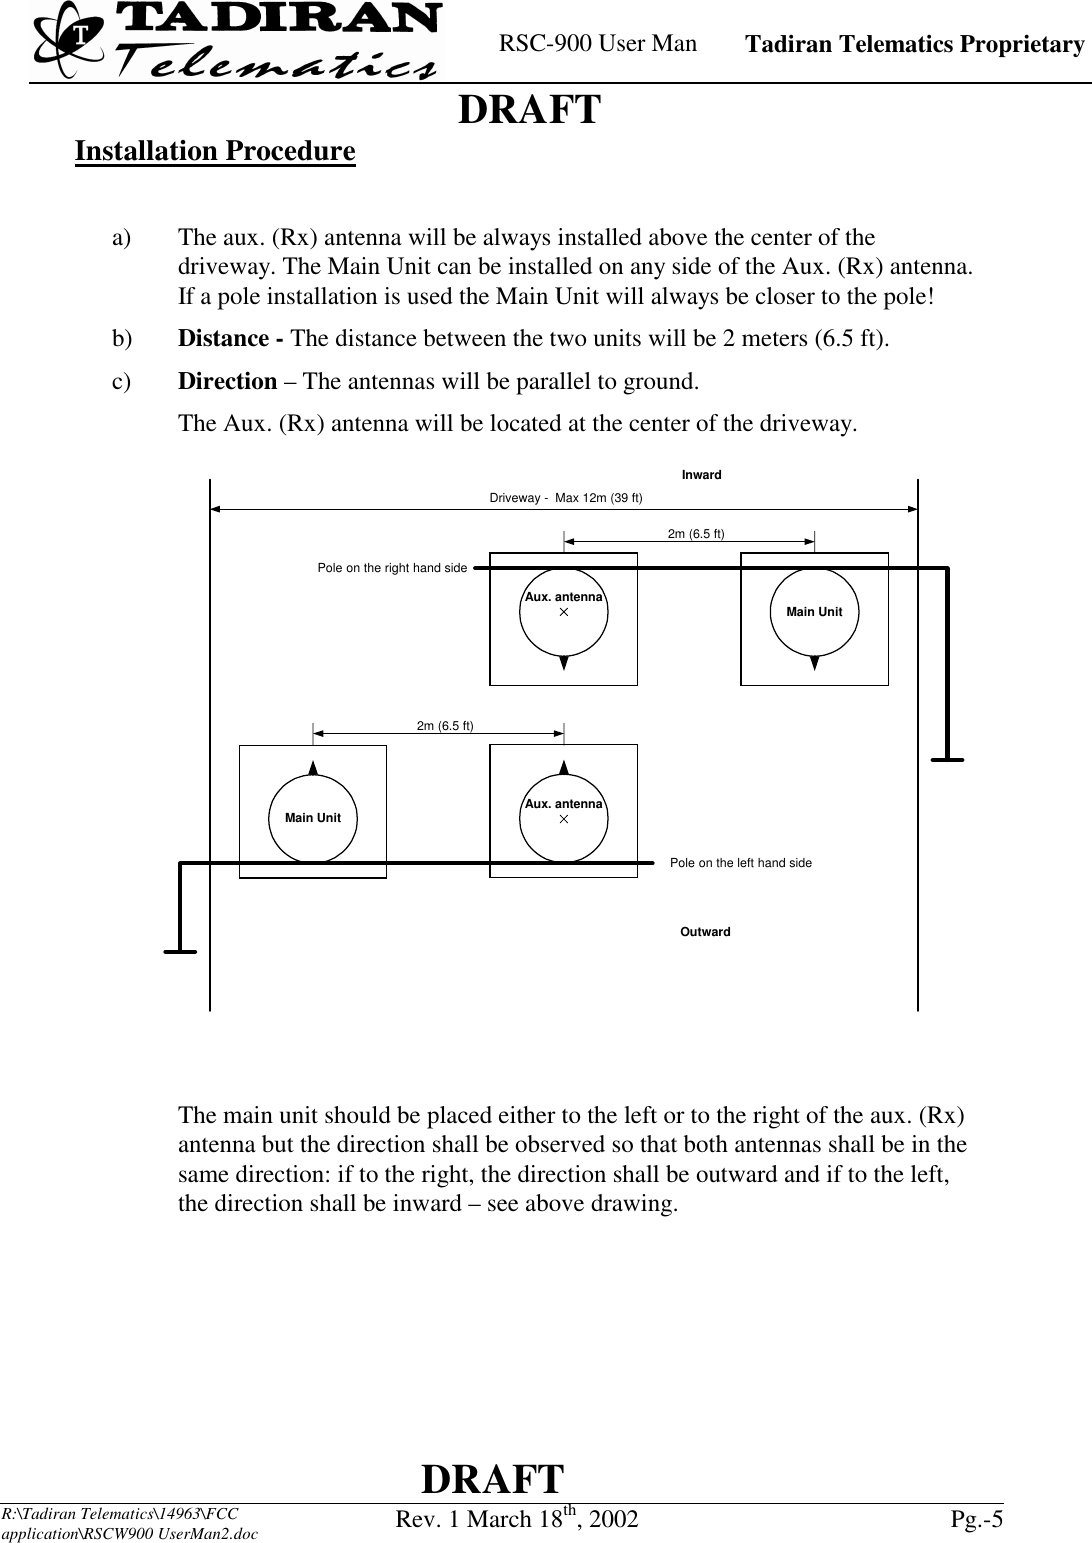    RSC-900 User Man   Tadiran Telematics Proprietary    DRAFT  DRAFT  R:\Tadiran Telematics\14963\FCC application\RSCW900 UserMan2.doc Rev. 1 March 18th, 2002  Pg.-5  Installation Procedure  a)  The aux. (Rx) antenna will be always installed above the center of the driveway. The Main Unit can be installed on any side of the Aux. (Rx) antenna. If a pole installation is used the Main Unit will always be closer to the pole!  b)  Distance - The distance between the two units will be 2 meters (6.5 ft). c)  Direction – The antennas will be parallel to ground. The Aux. (Rx) antenna will be located at the center of the driveway.    The main unit should be placed either to the left or to the right of the aux. (Rx) antenna but the direction shall be observed so that both antennas shall be in the same direction: if to the right, the direction shall be outward and if to the left, the direction shall be inward – see above drawing.    2m (6.5 ft)Driveway -  Max 12m (39 ft)Aux. antenna Main UnitInwardPole on the right hand side2m (6.5 ft)Aux. antennaMain UnitOutwardPole on the left hand side